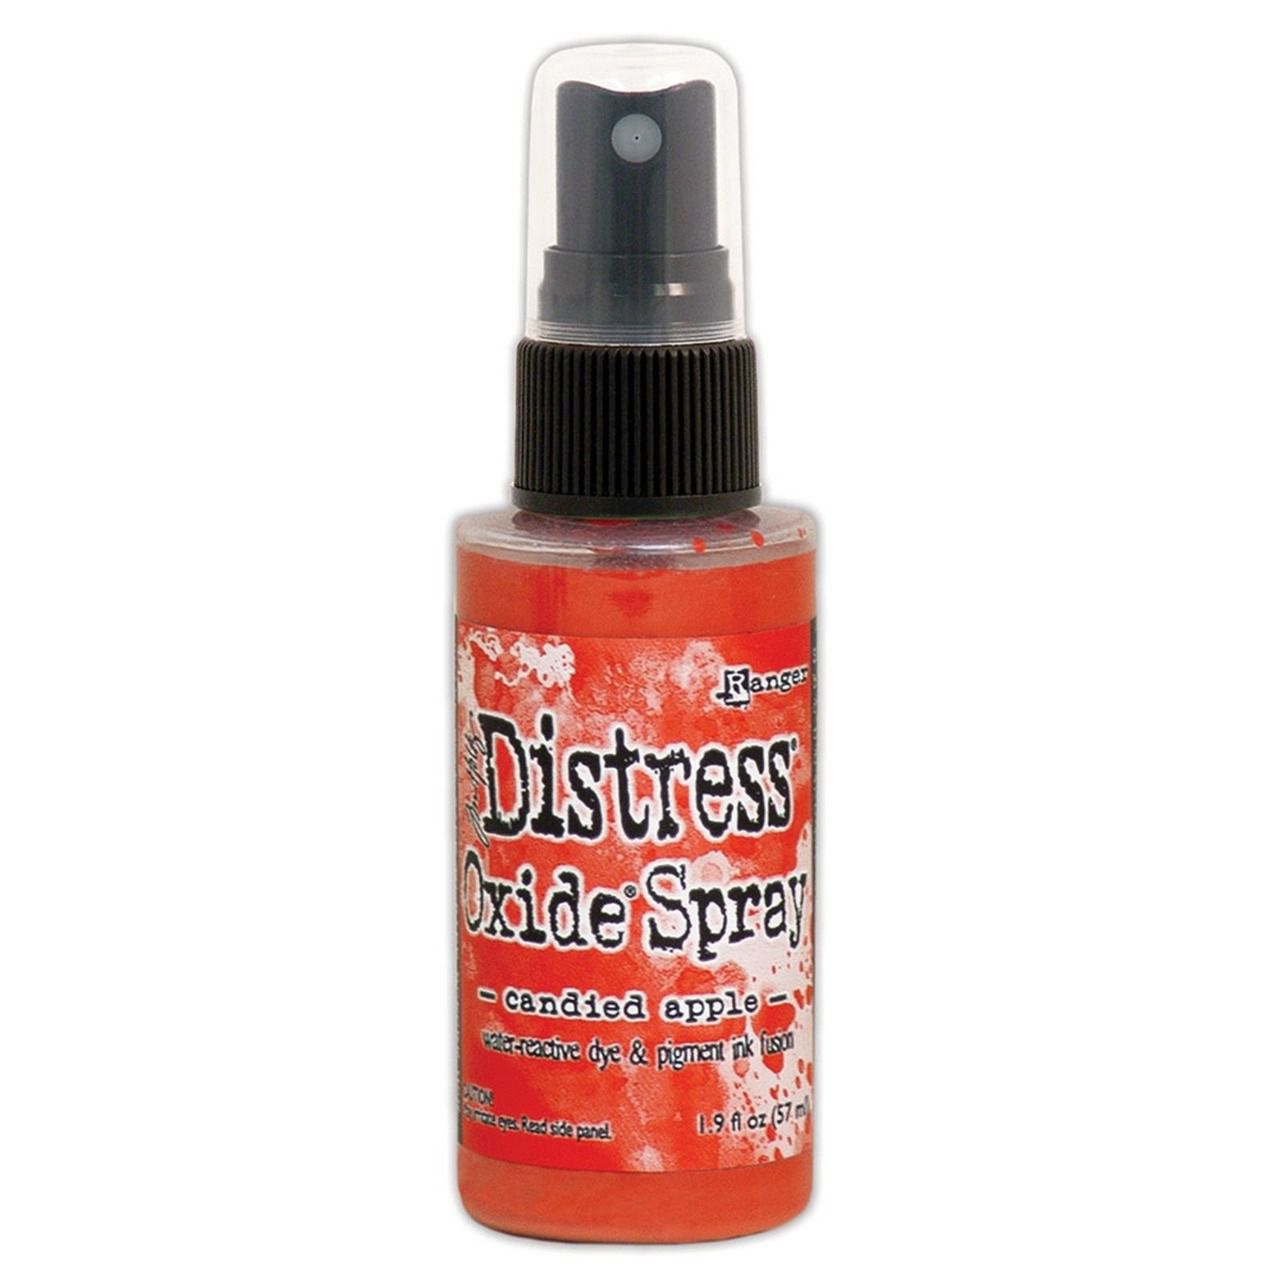 Distress spray oxide : Candied apple